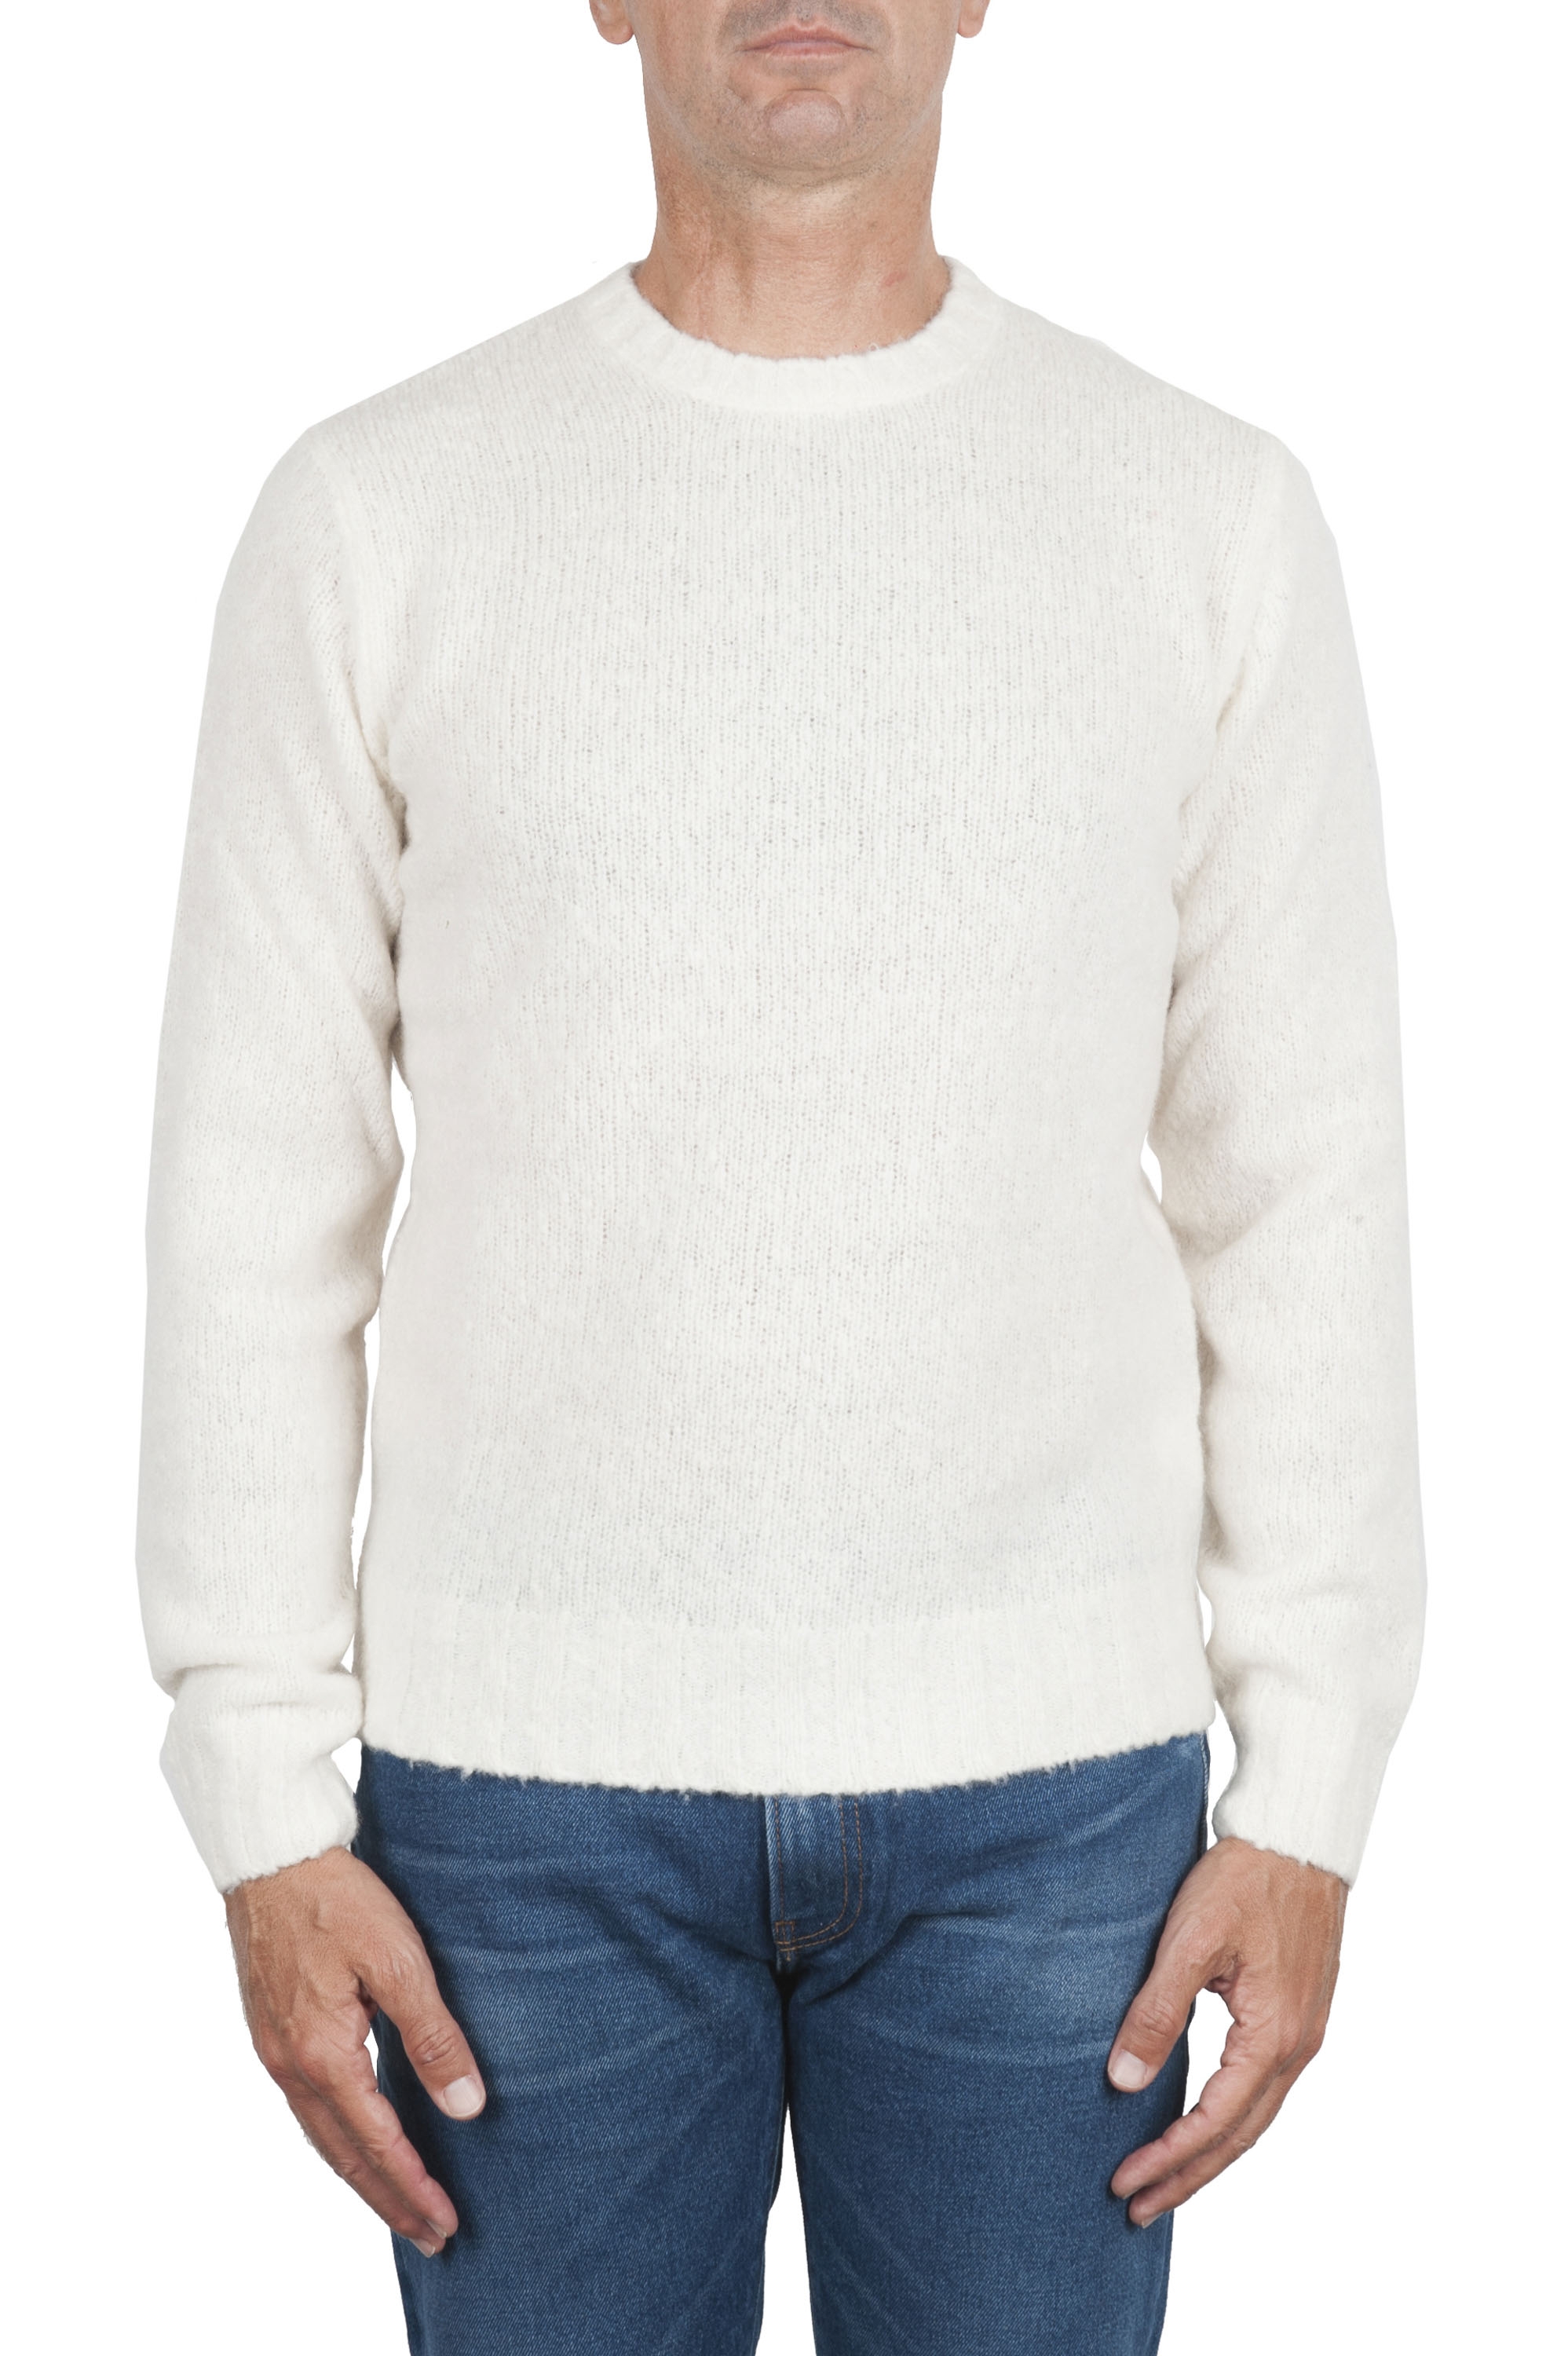 SBU 02985_2020AW White cashmere and wool blend crew neck sweater 01